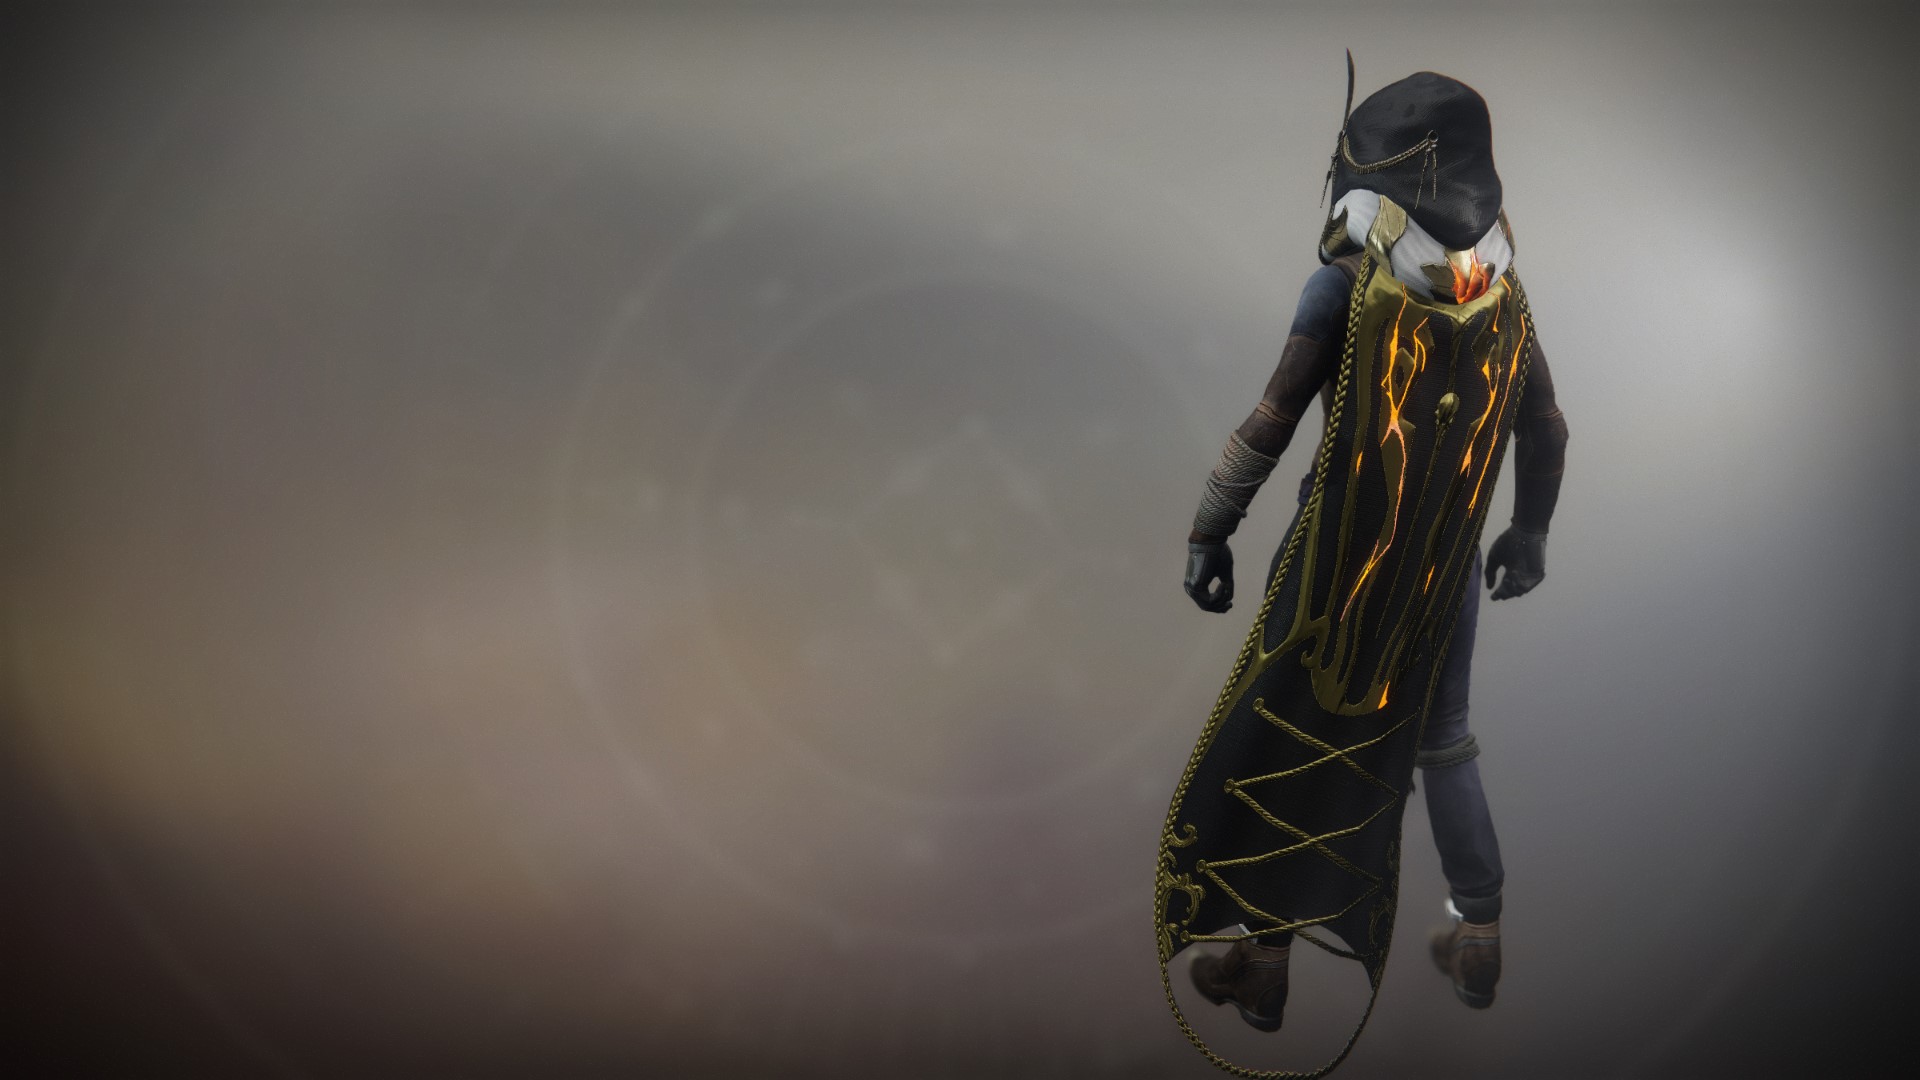 An in-game render of the Solstice Cloak (Magnificent).